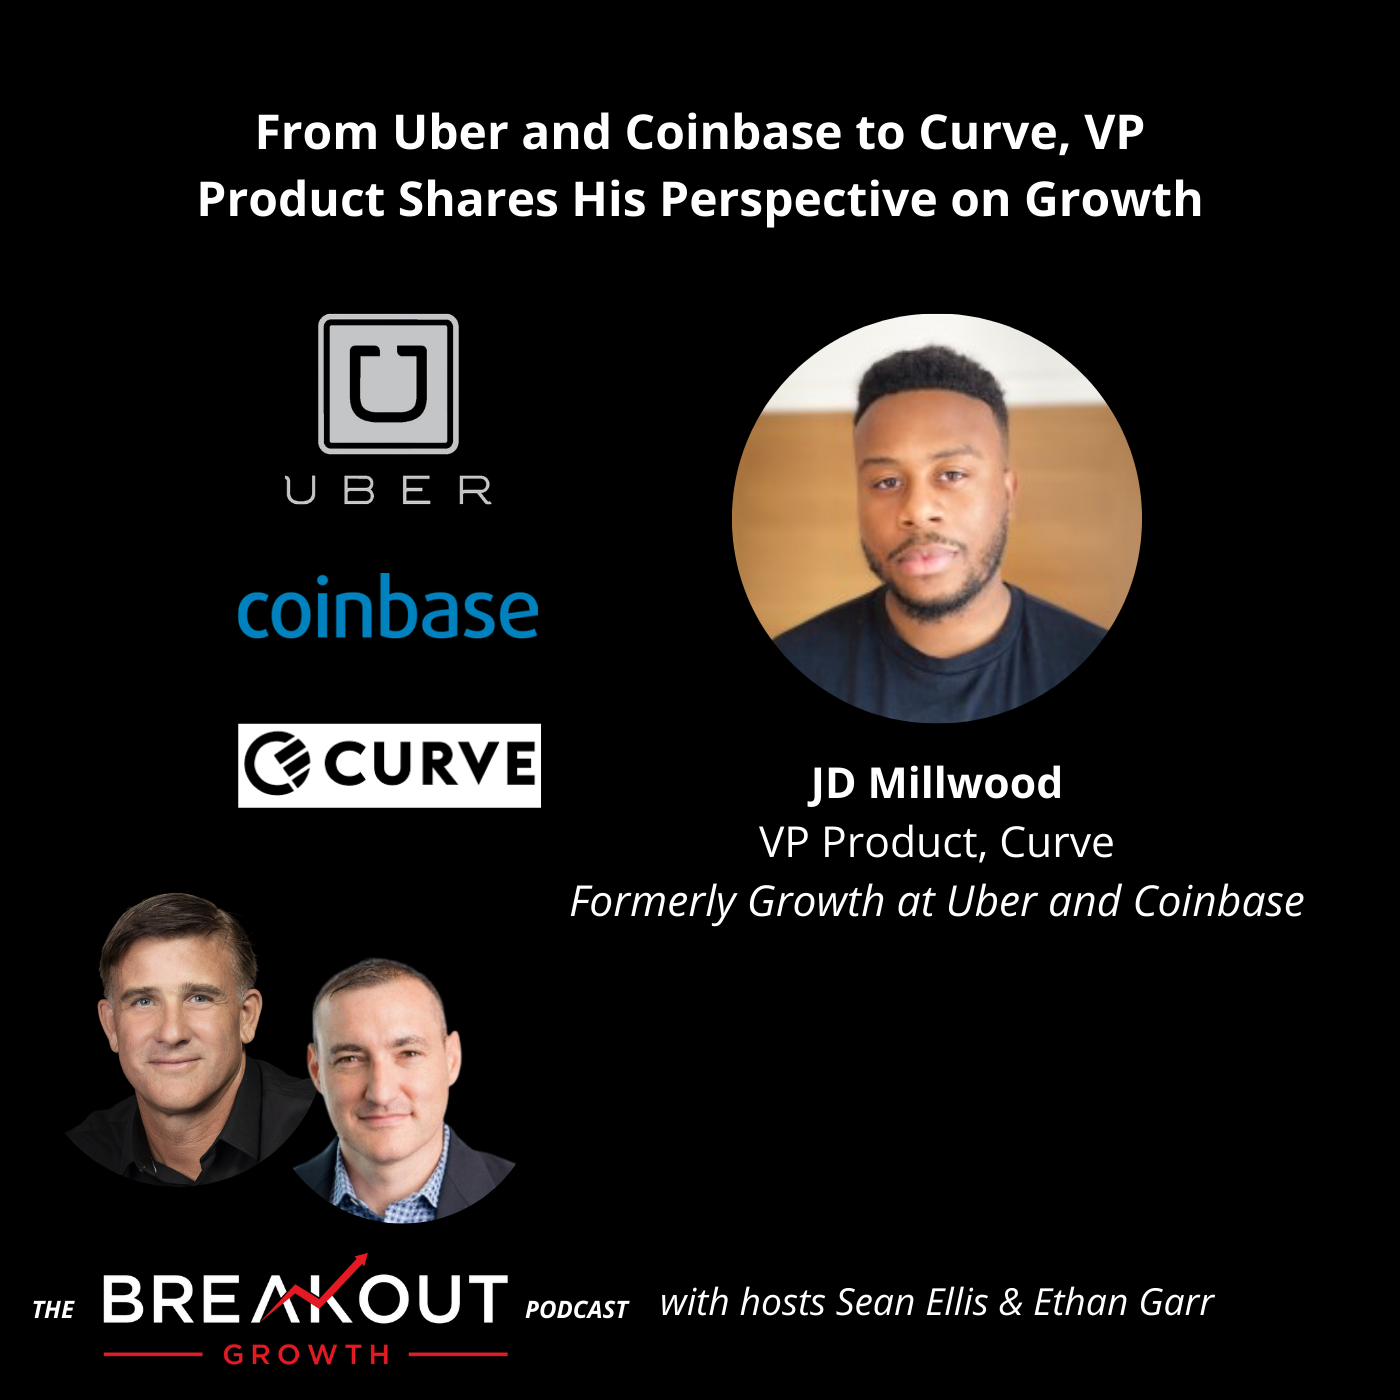 From Uber and Coinbase to Curve, VP Product Shares His Views on Growth